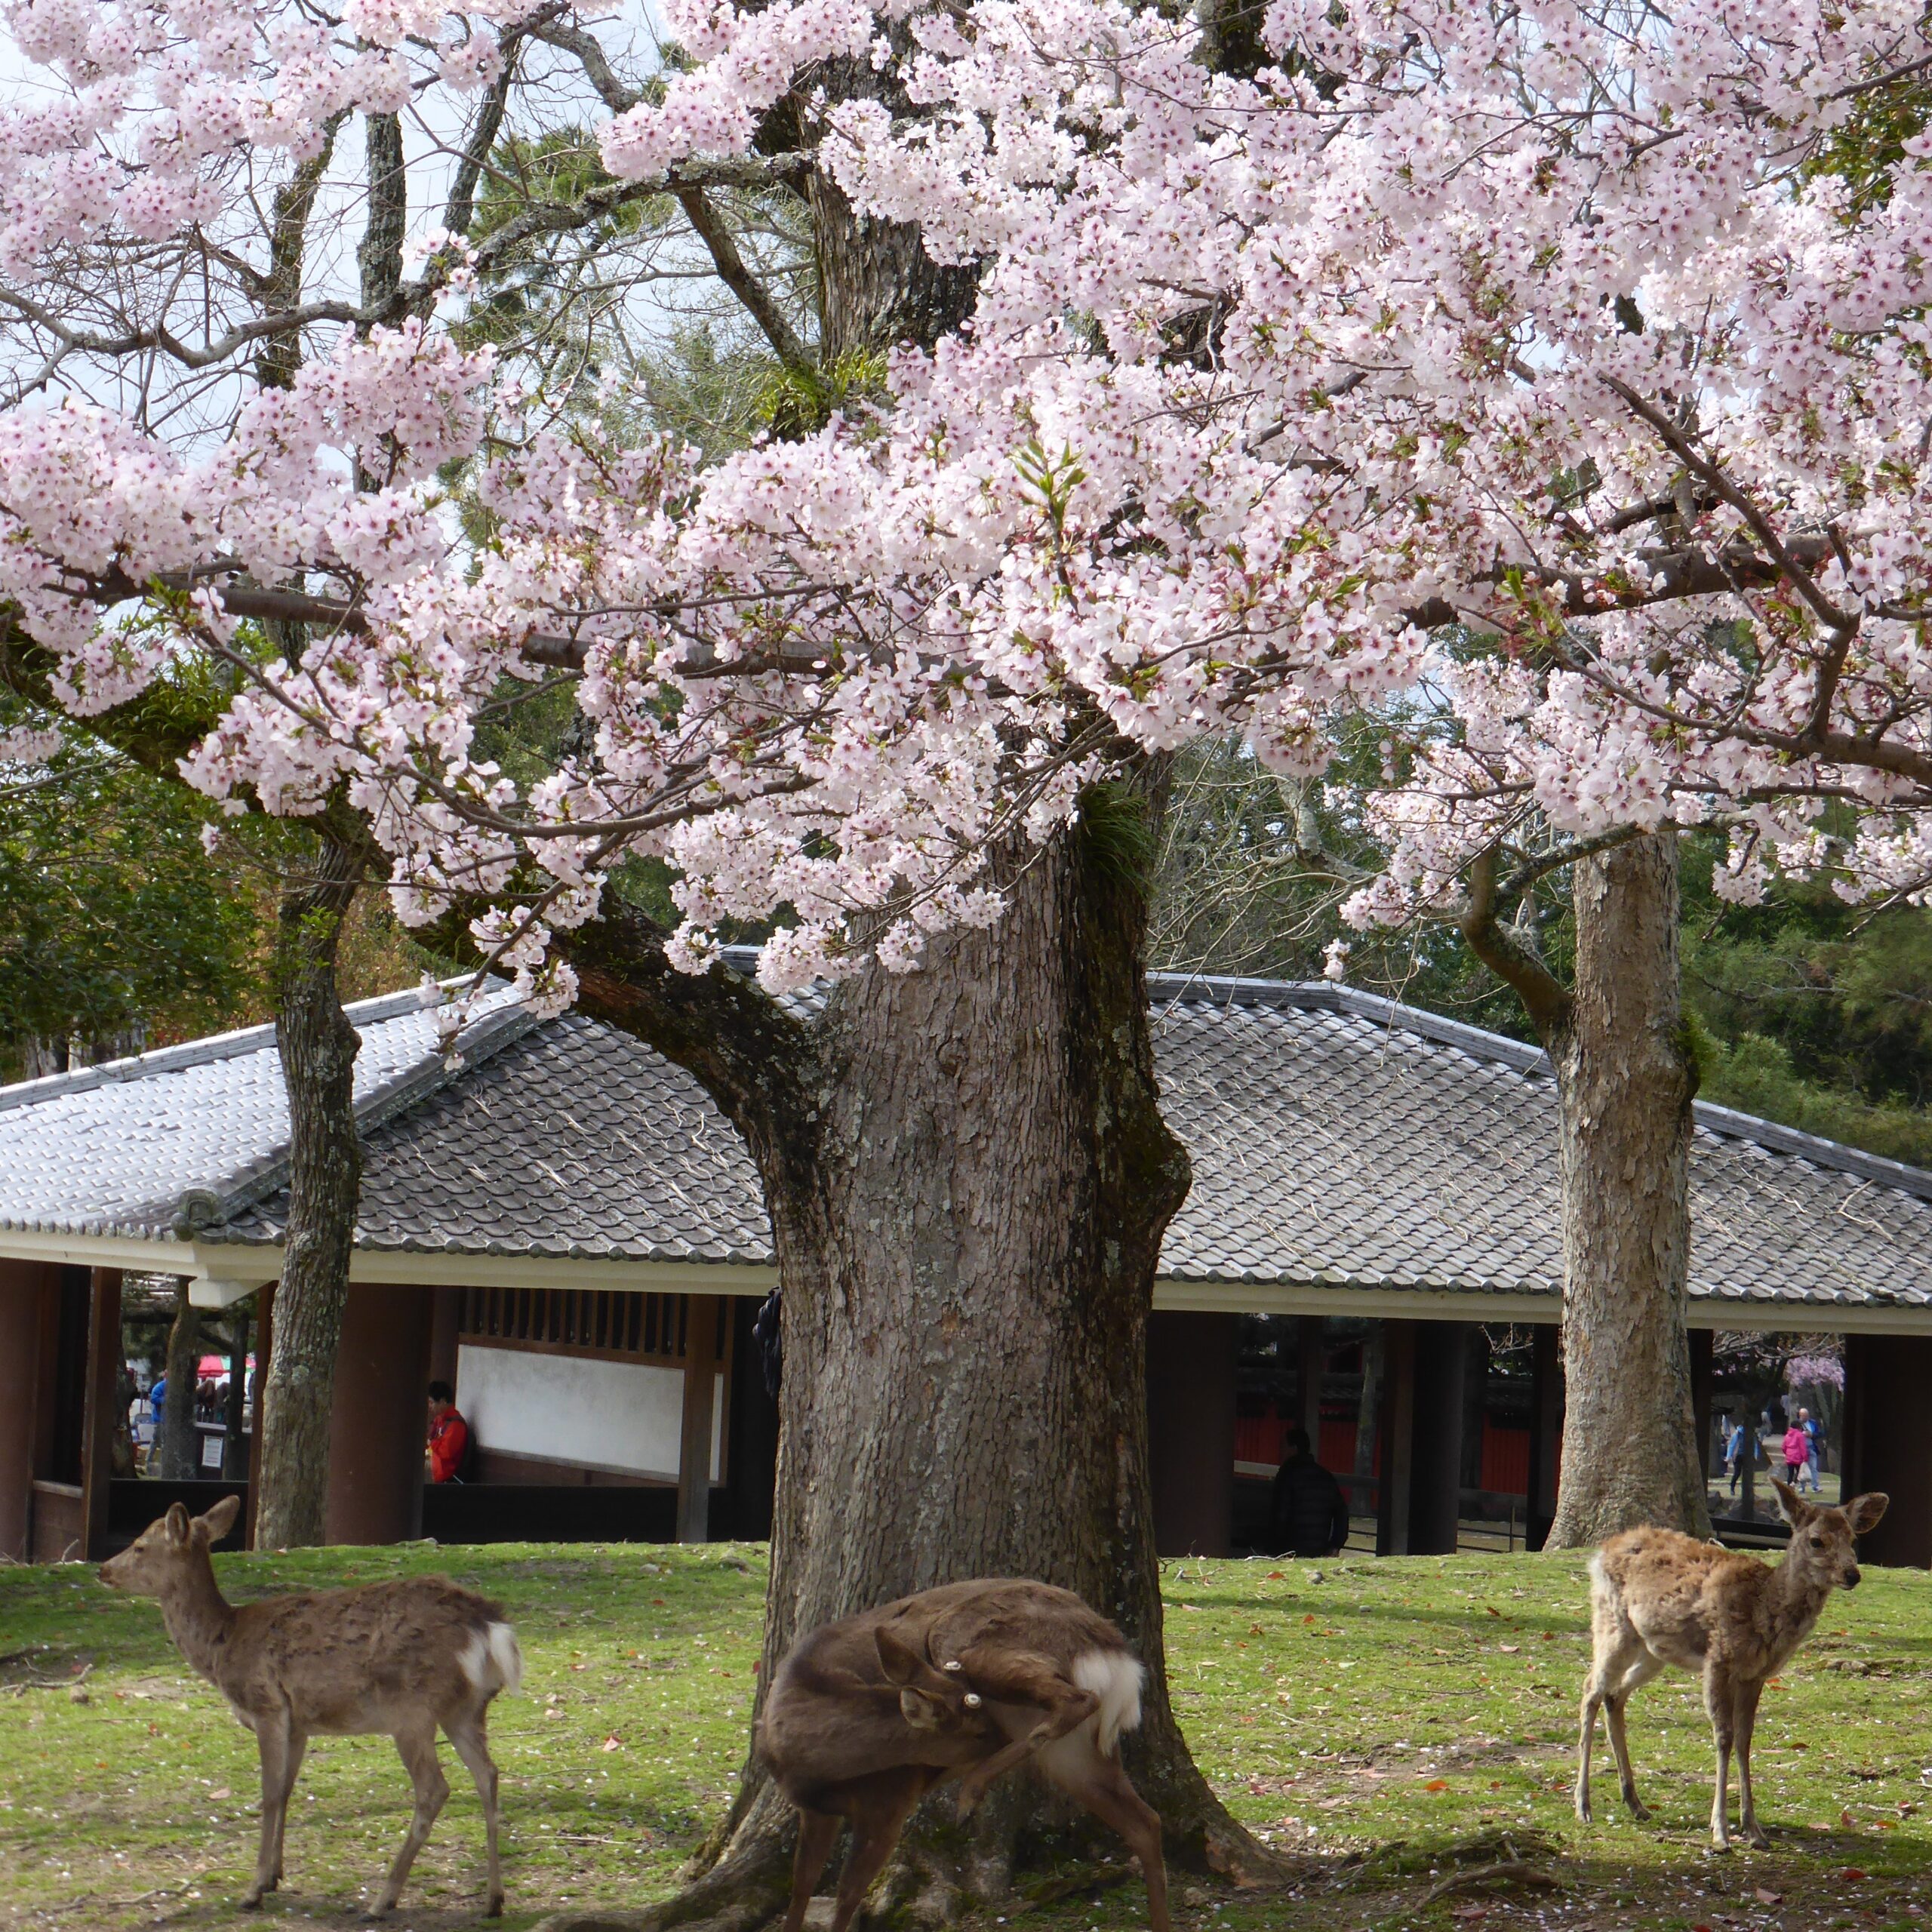 Deer and cherry blossom in Nara Park square